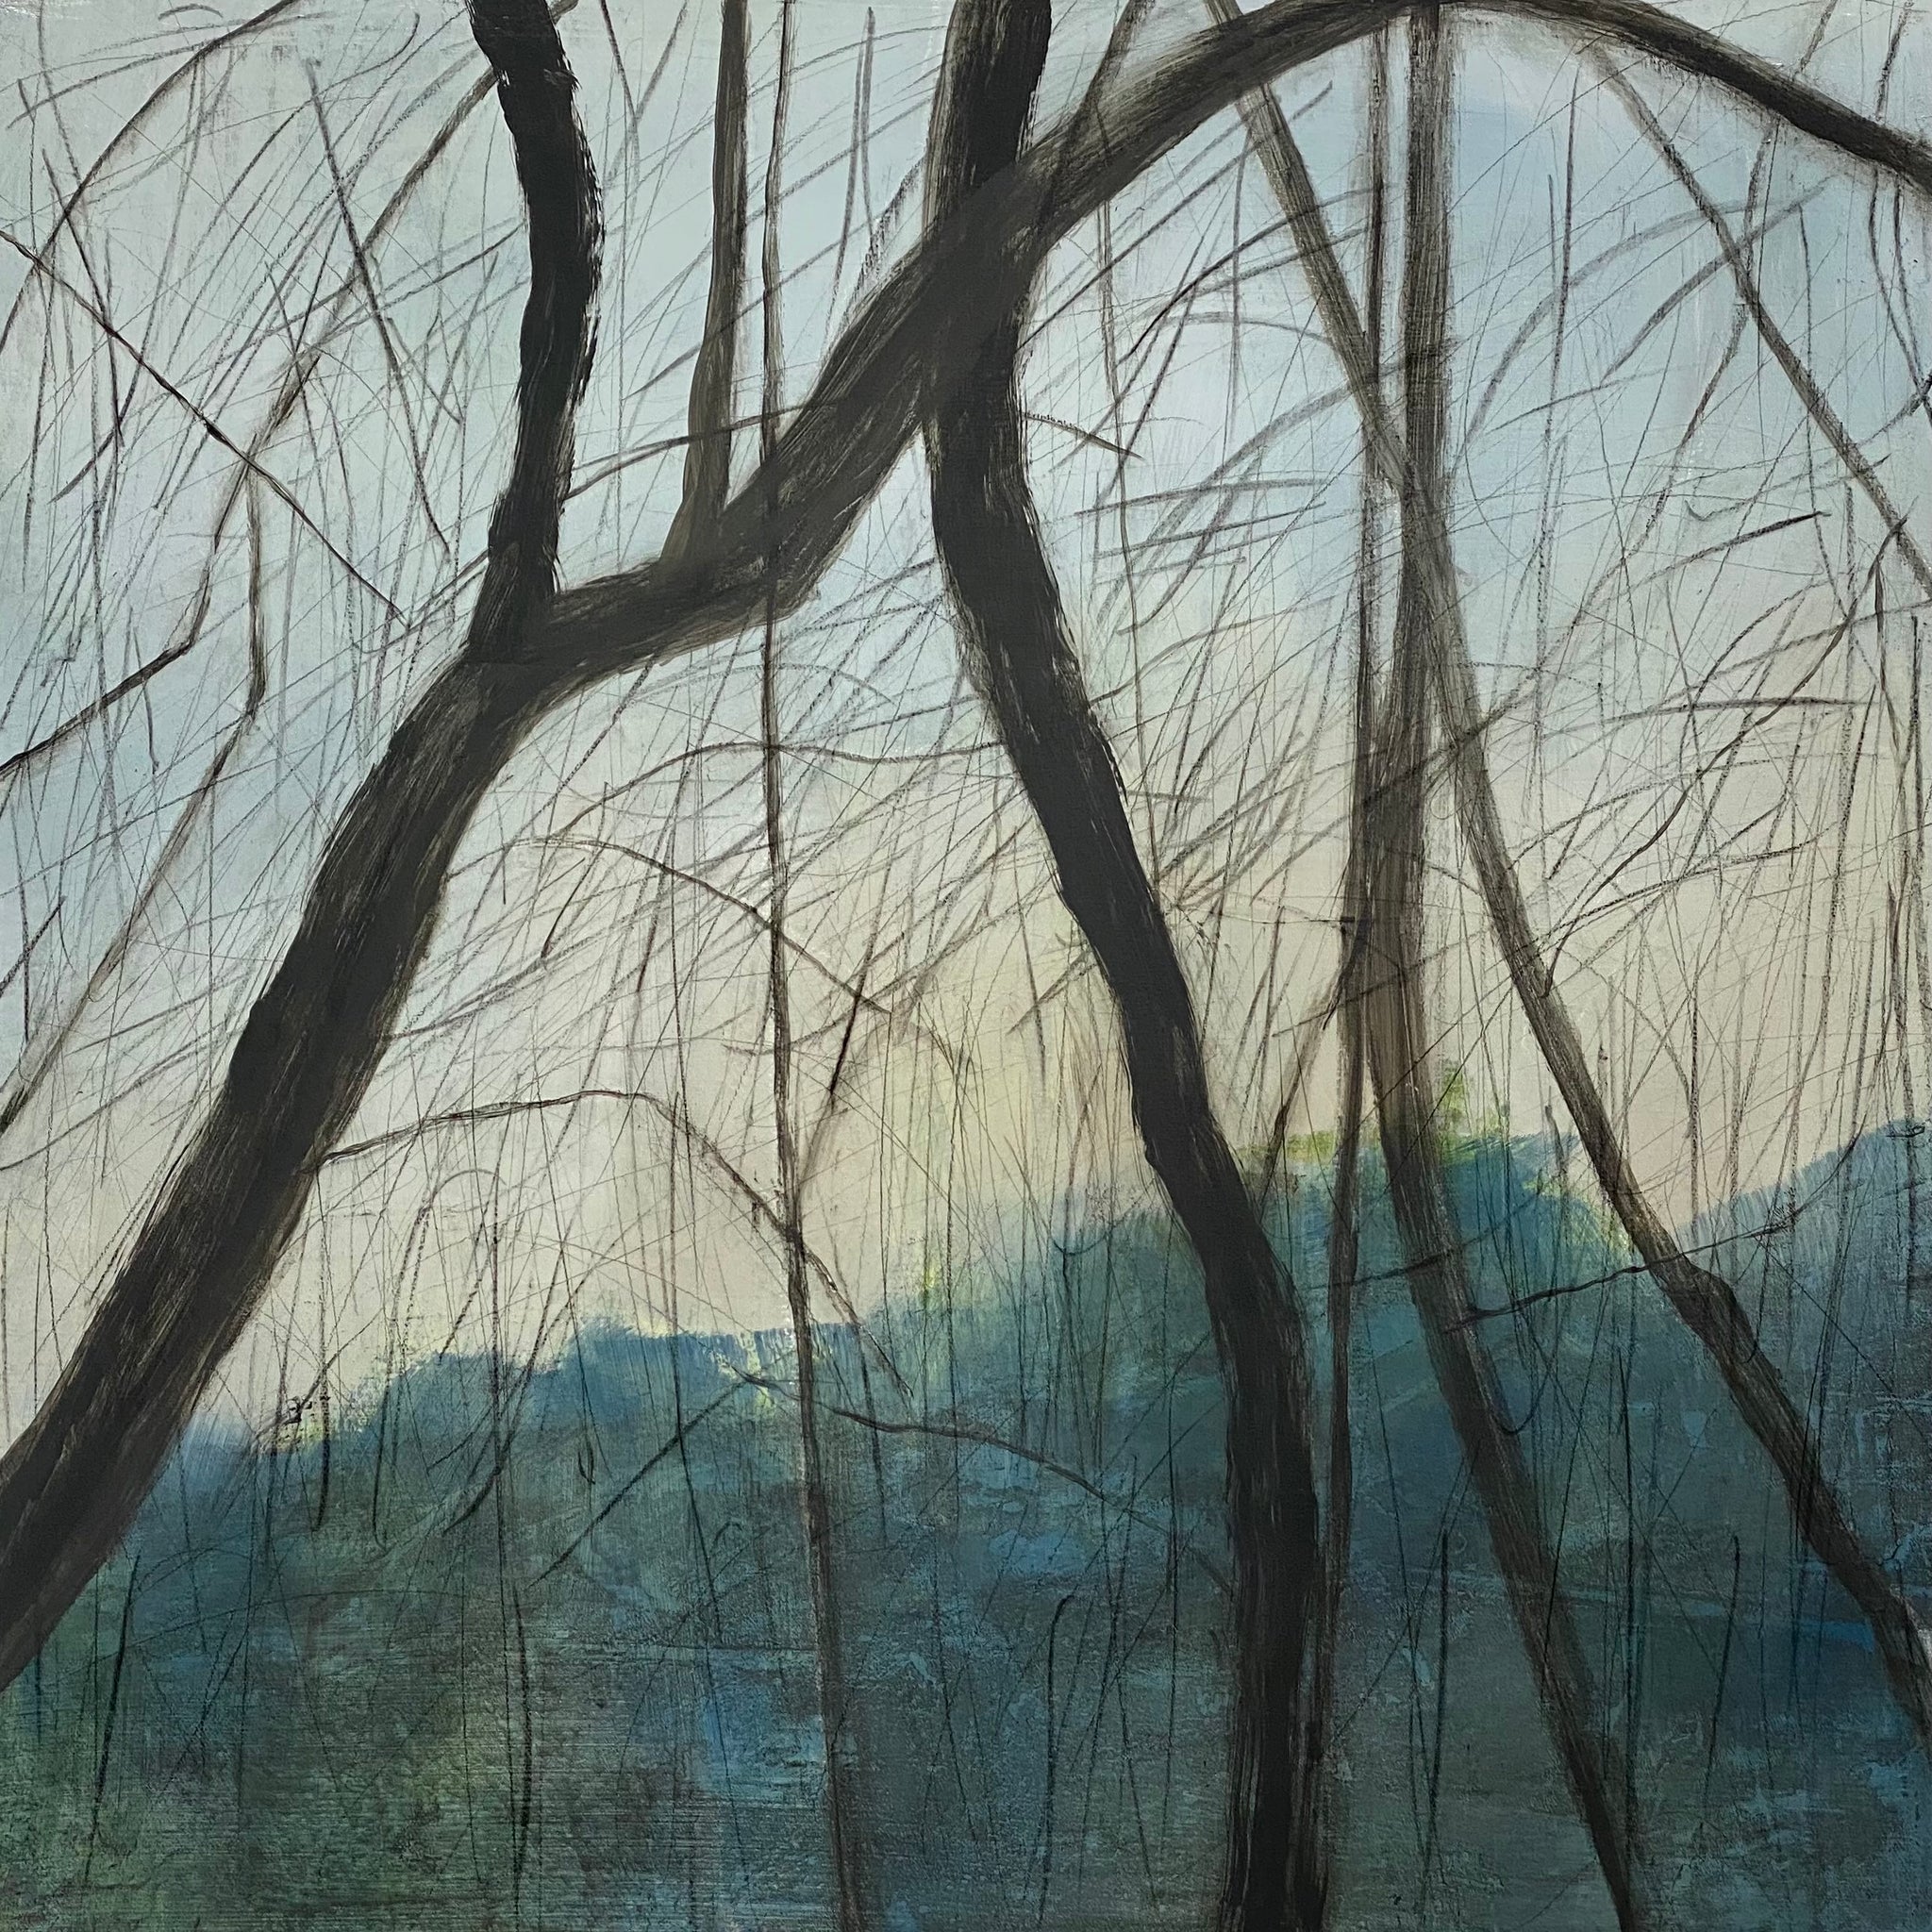 Juanita Bellavance, The setting sun, From the Chestatee River portfolio, 2021, Acrylic and graphite on canvas, 24 x 24 inches